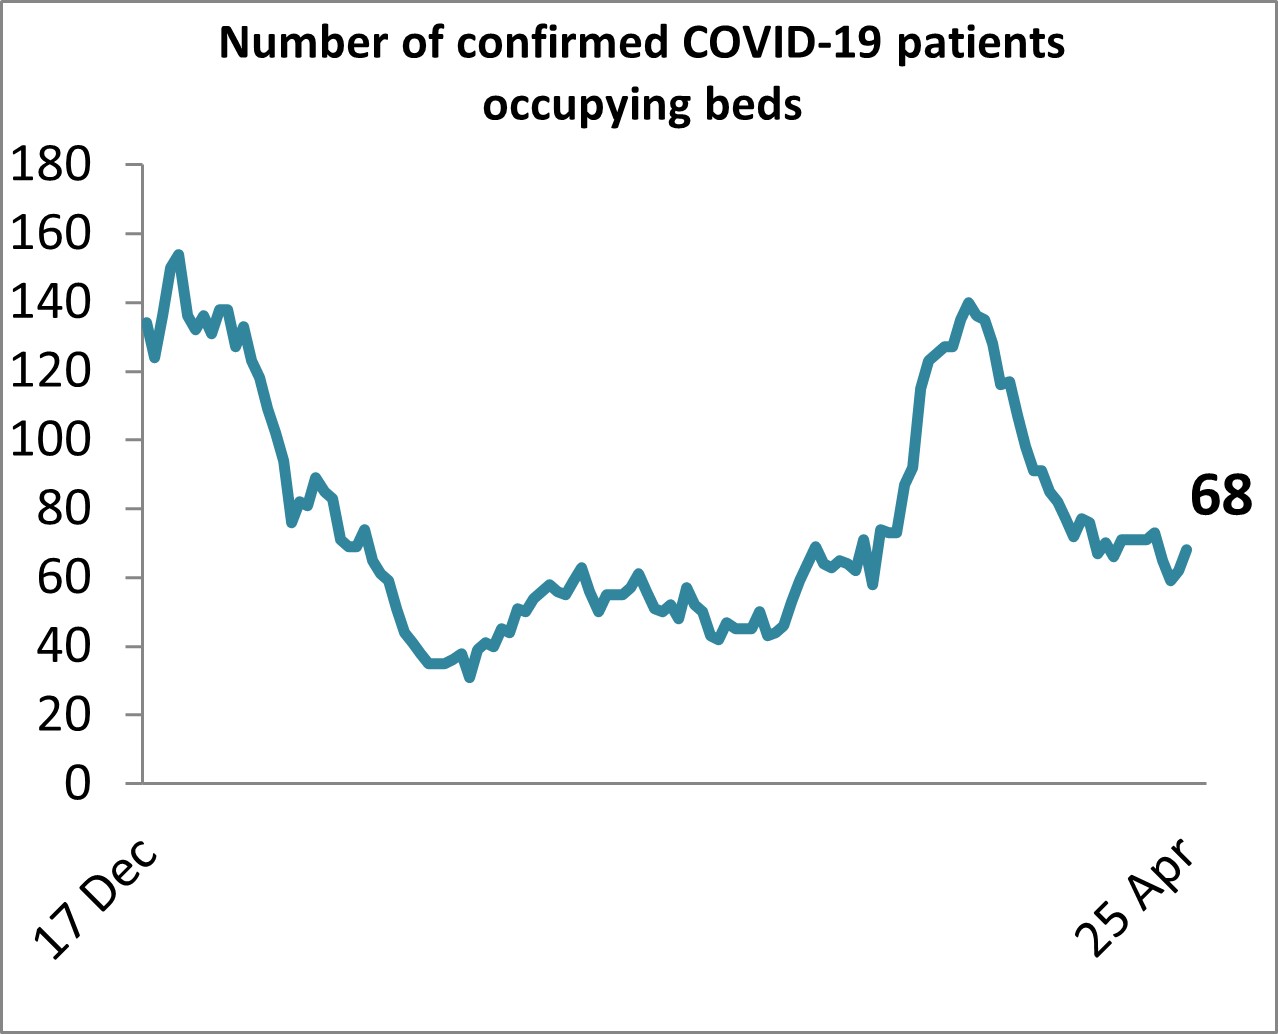 Graph showing the number of confirmed COVID-19 patients occupying hospital beds in Bristol since 17 December 2022. There are 68 patients in hospital with COVID-19.